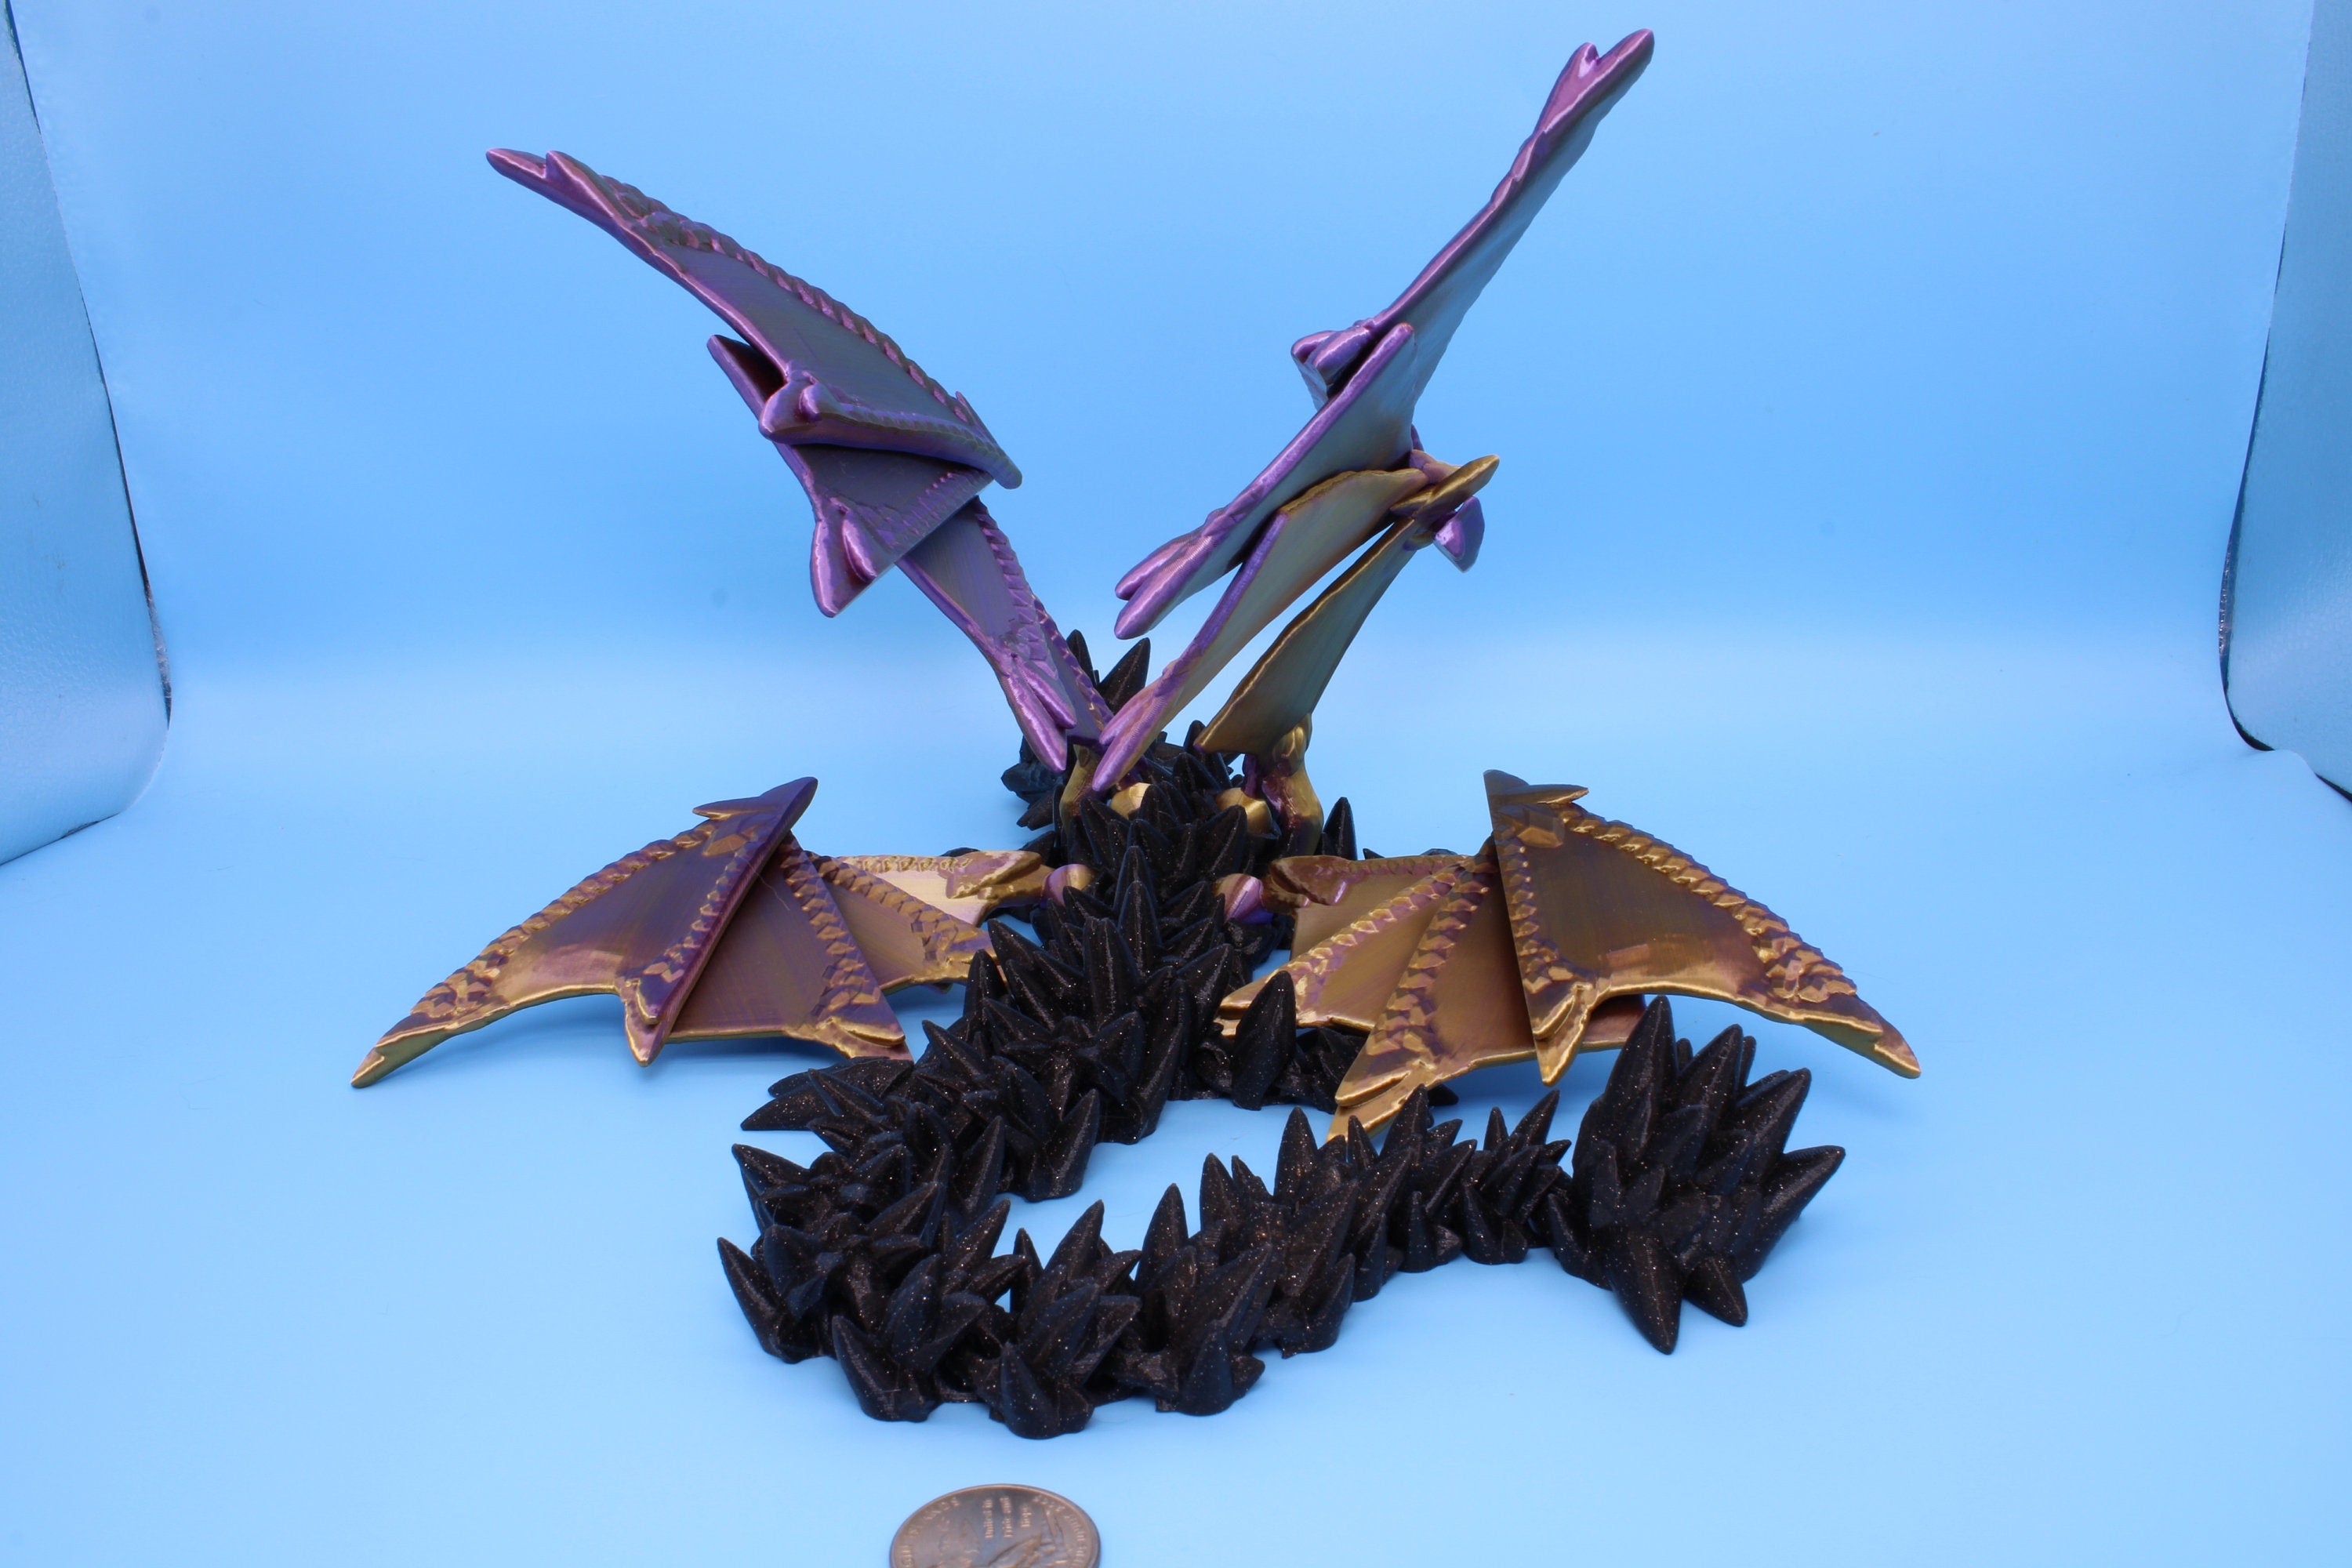 Spike Wing Dragon | 3D Printed Articulating Dragon 19 in.